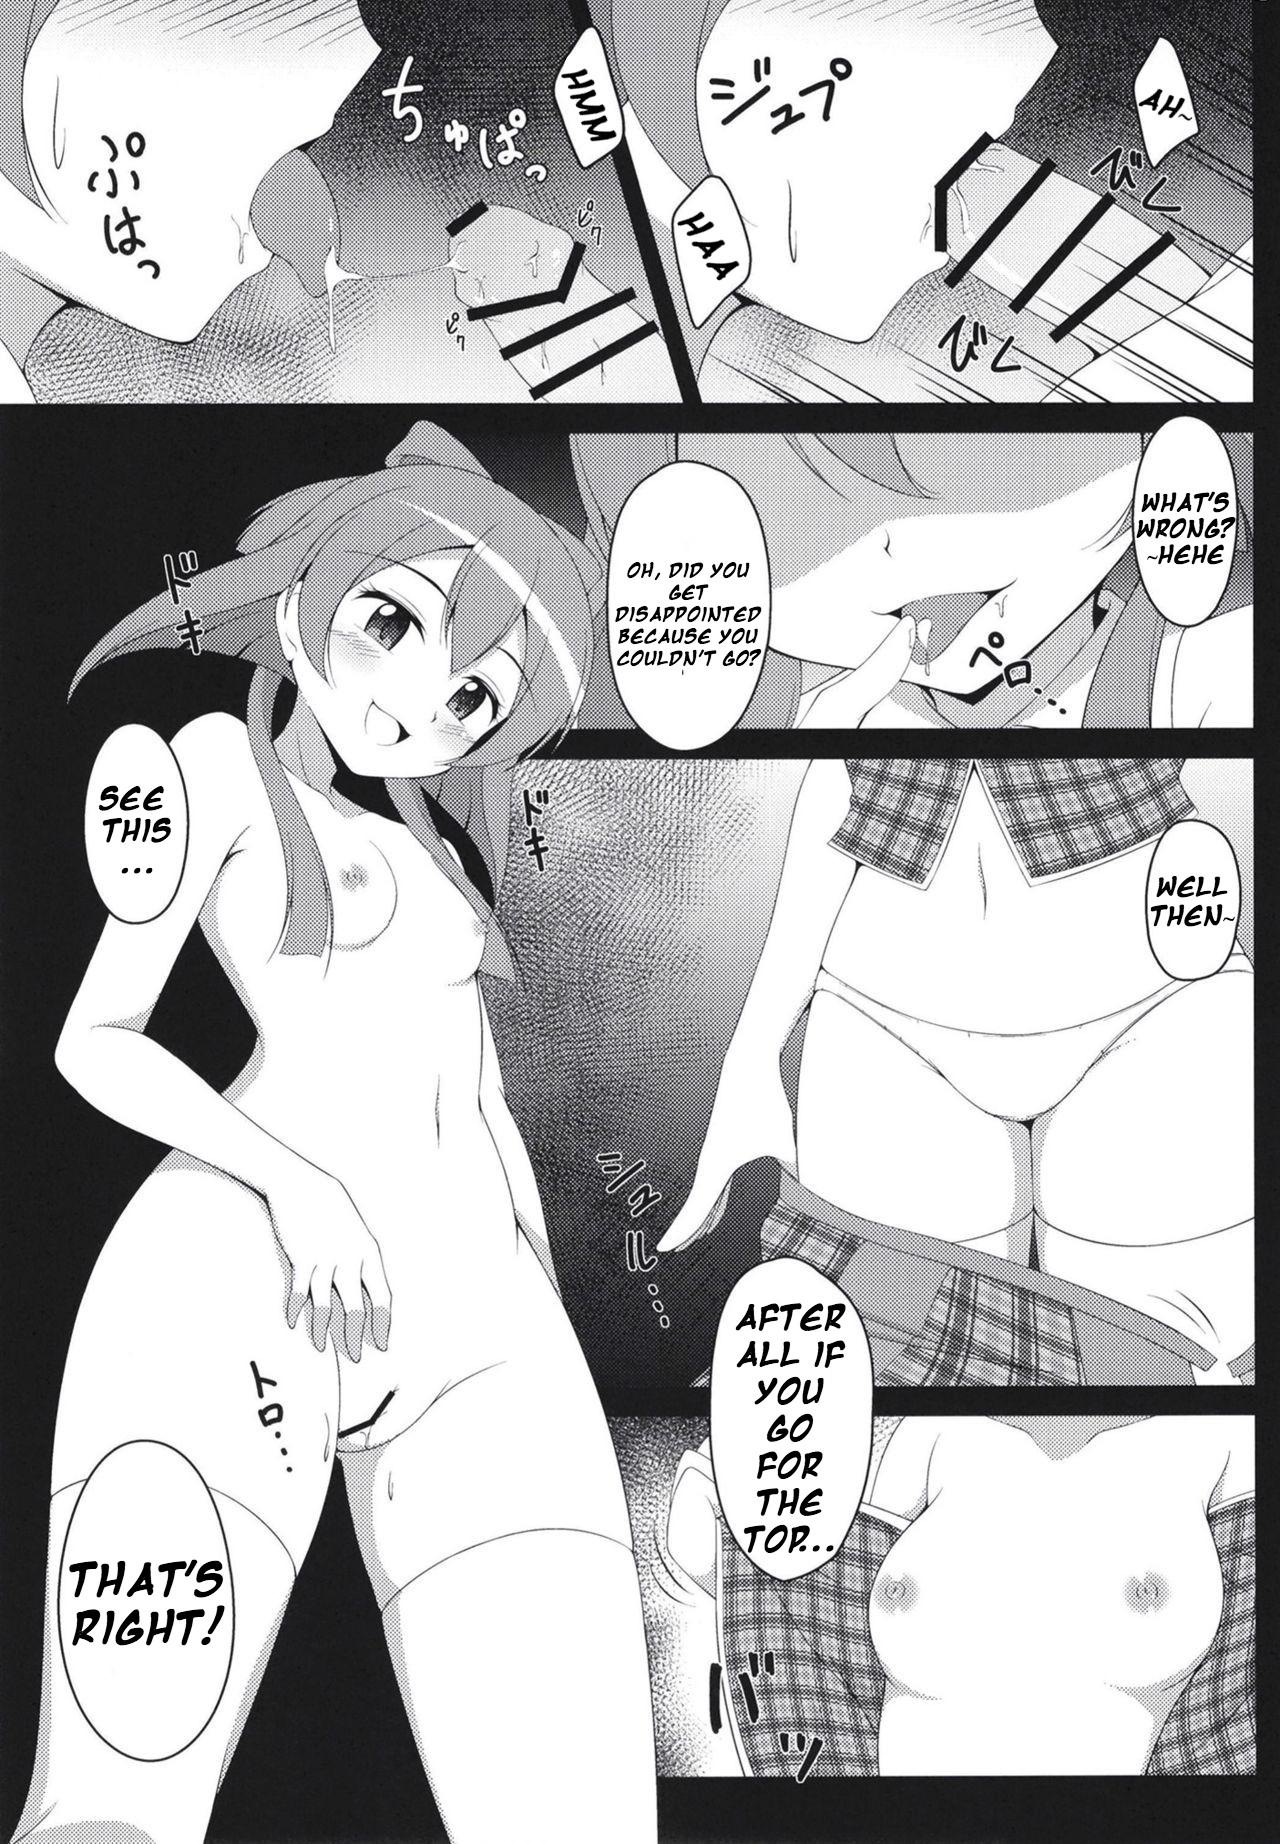 Hot Mom After-party - Puella magi madoka magica side story magia record Free Amature - Page 8